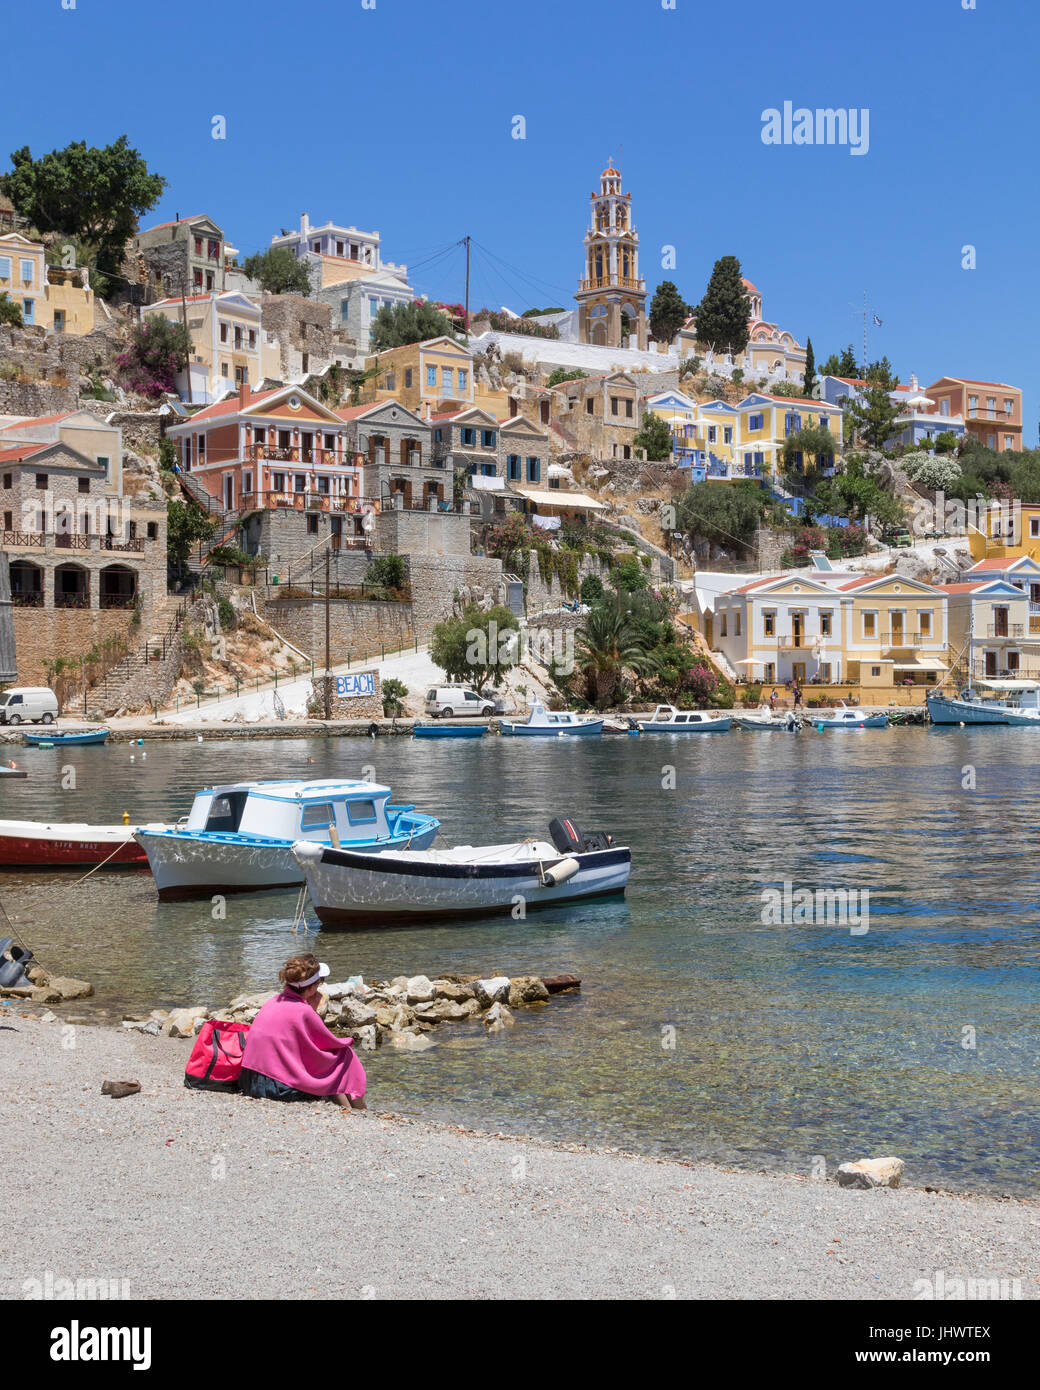 Symi Island, South Aegean, Greece - time to relax by the harbour at the main town / port, Gialos (or Yialos, as it is also known) Stock Photo